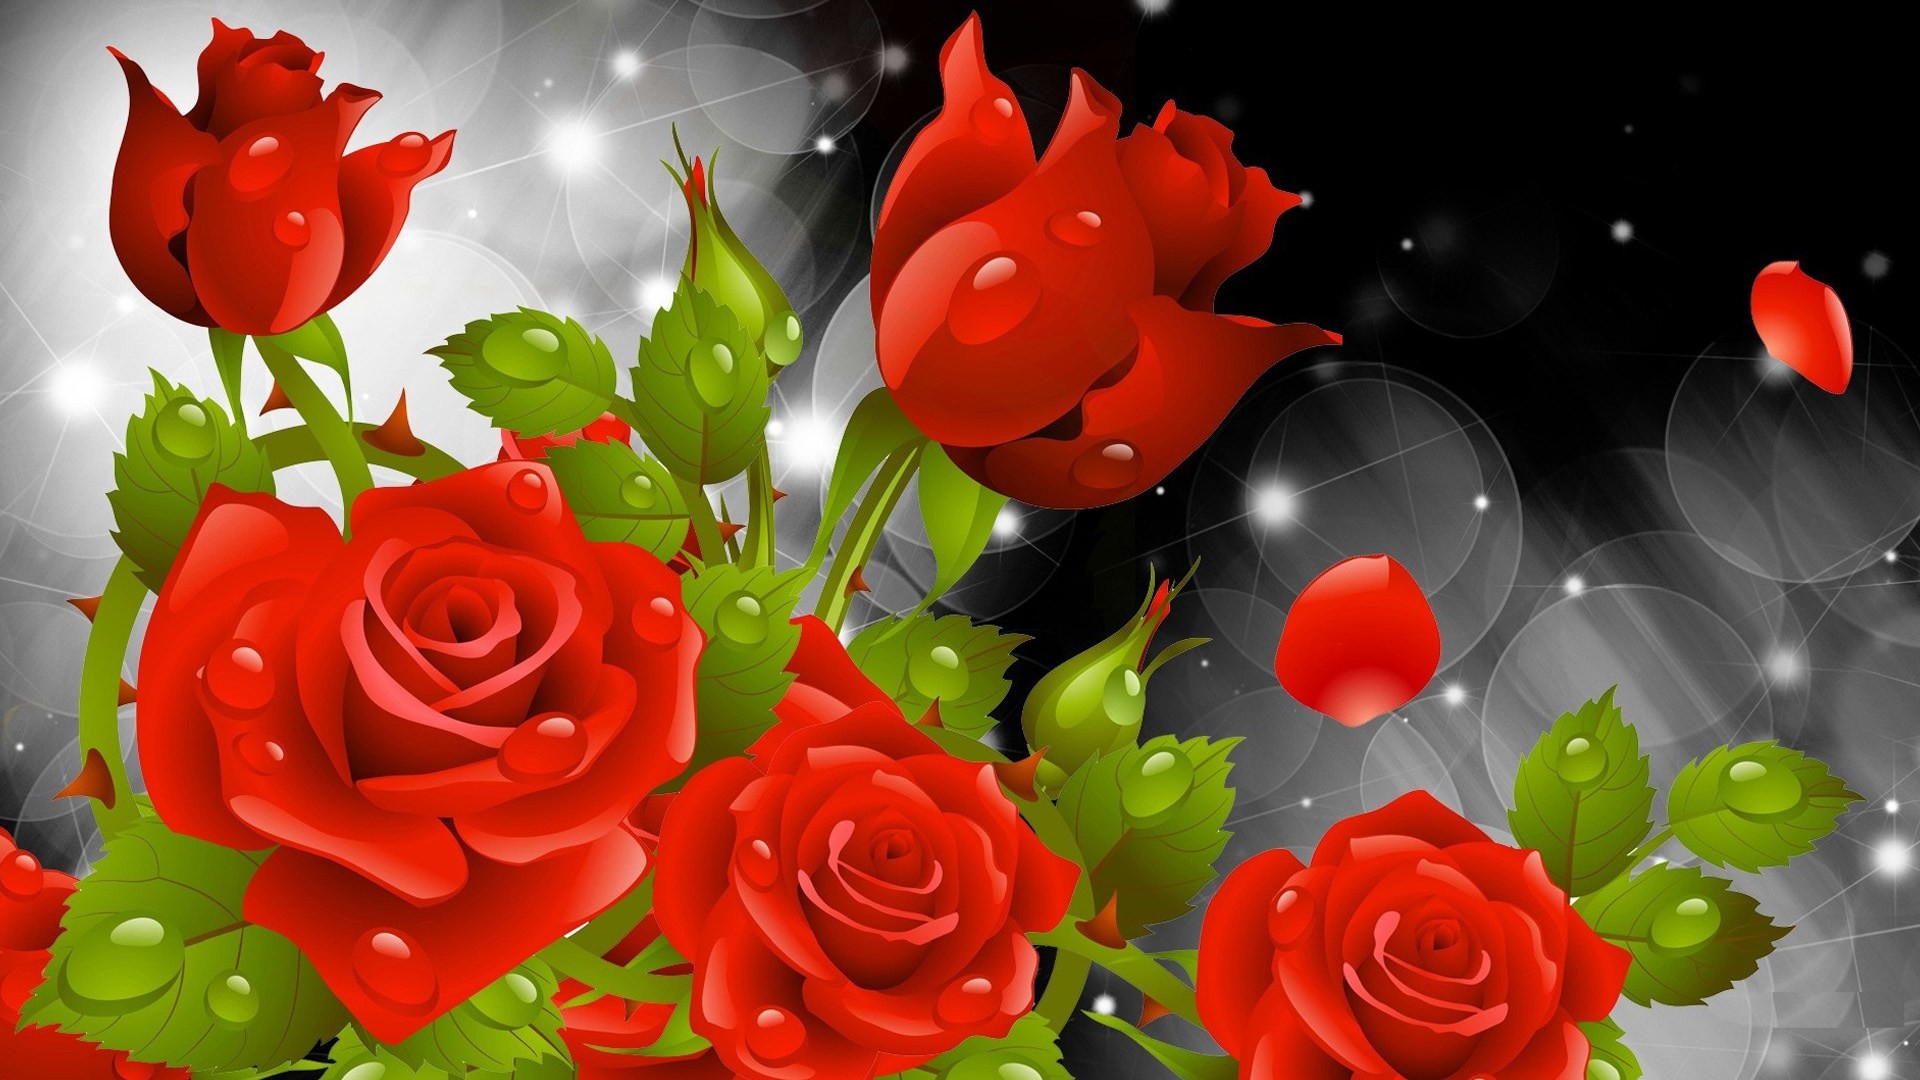 1920x1080 red rose wallpaper inspirational red rose wallpapers red flowers hd  pictures one hd wallpaper of red rose wallpaper